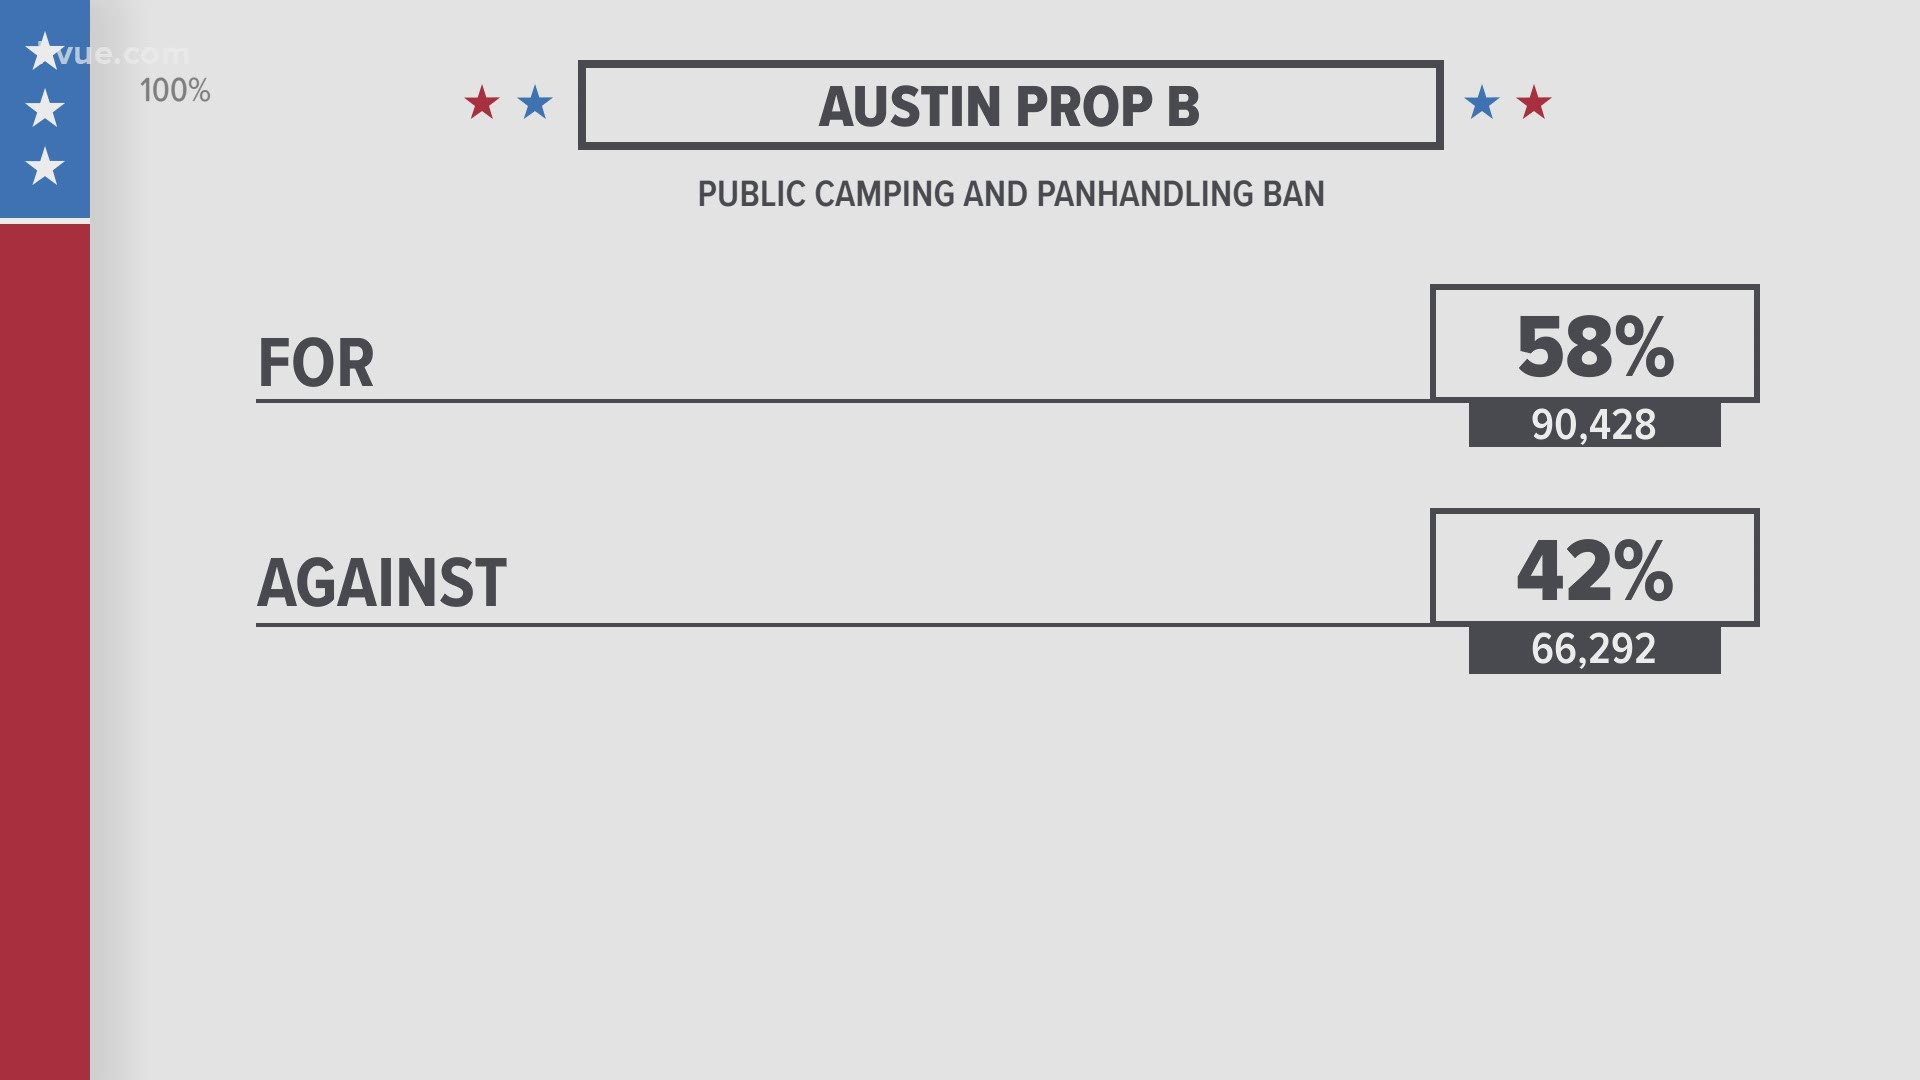 Austin voters chose to approve the proposition aimed at reinstating the City's public camping ban.